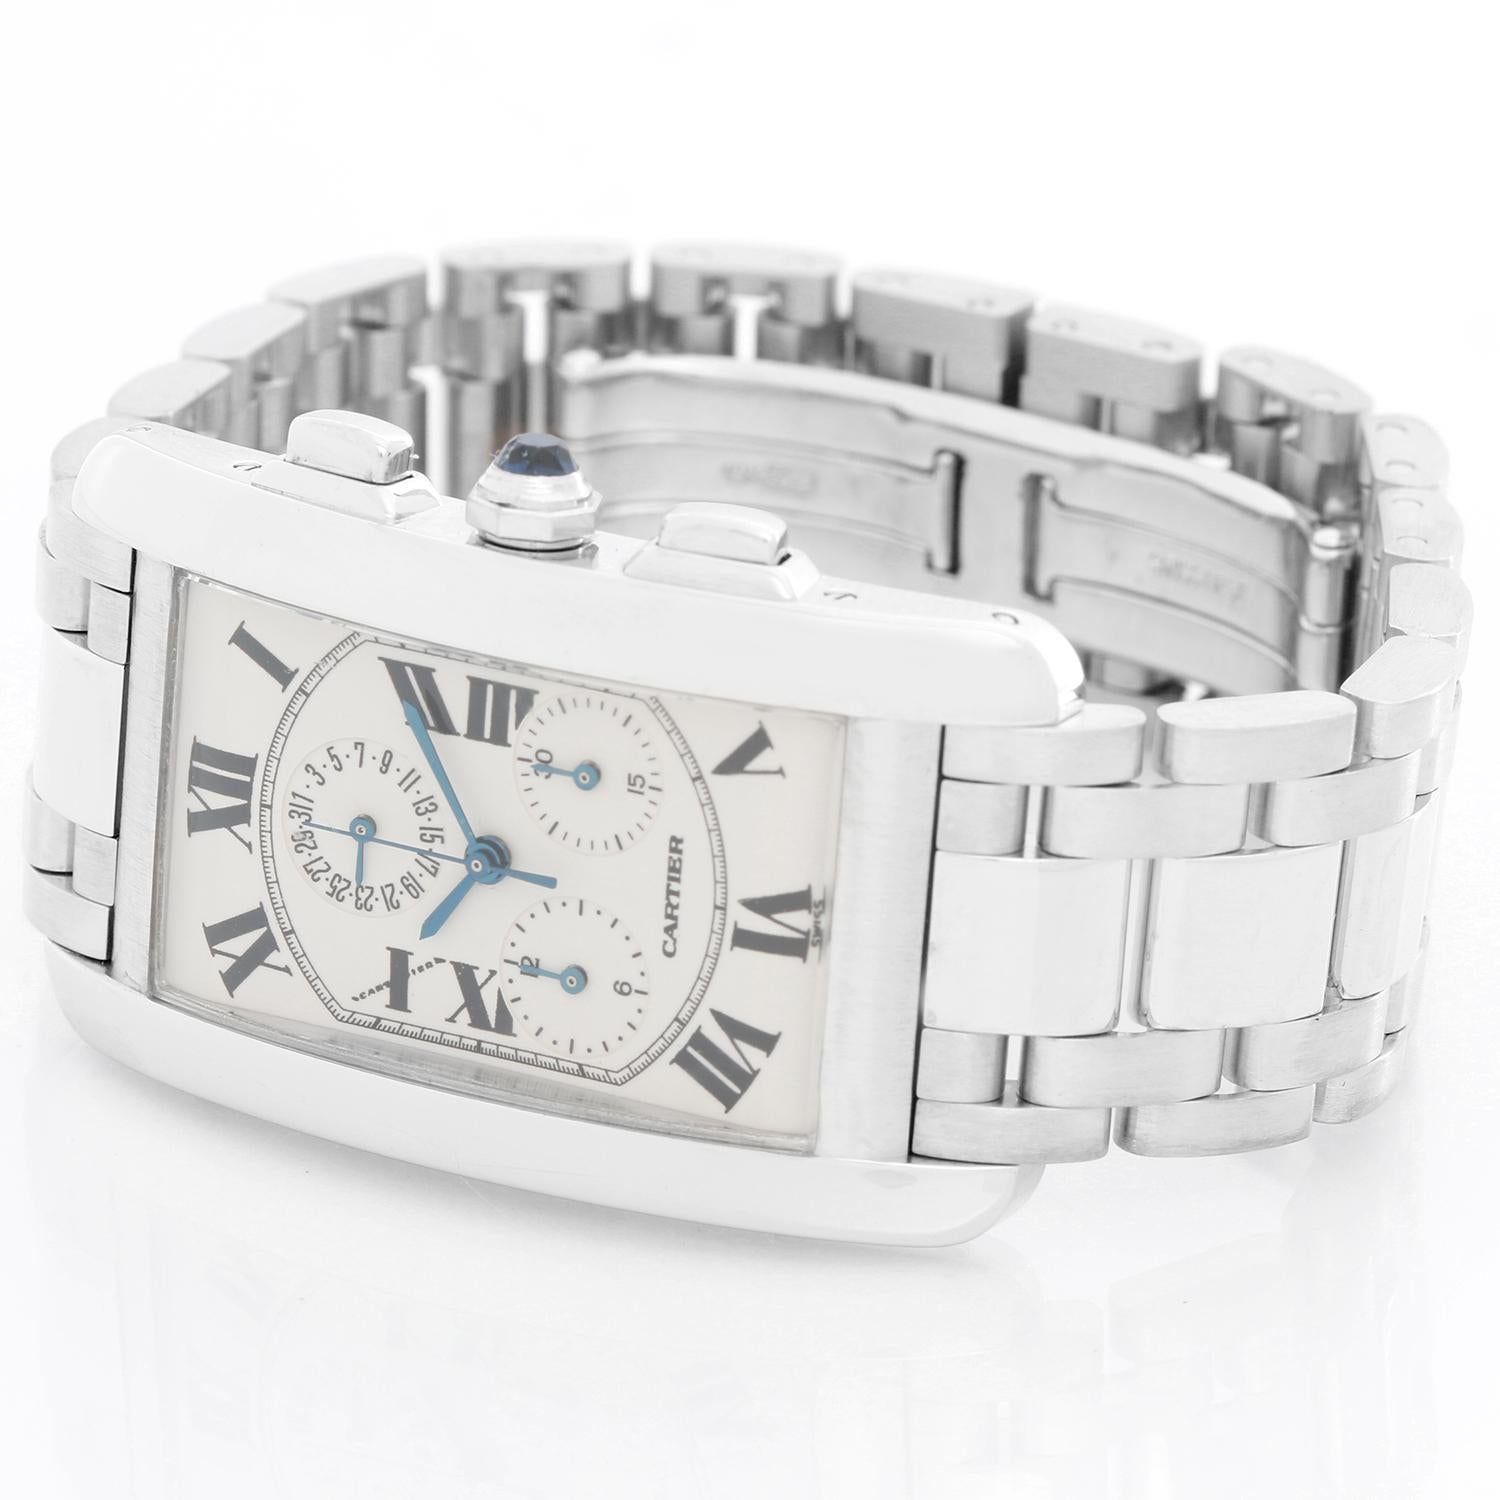 Cartier Tank Americaine (or American) Chronograph Men's Watch W2603356 - Quartz chronograph with date. 18k white gold rectangular style case (26mm x 45mm). Ivory colored dial with black Roman numerals; date; hour minutes and seconds recorders. White